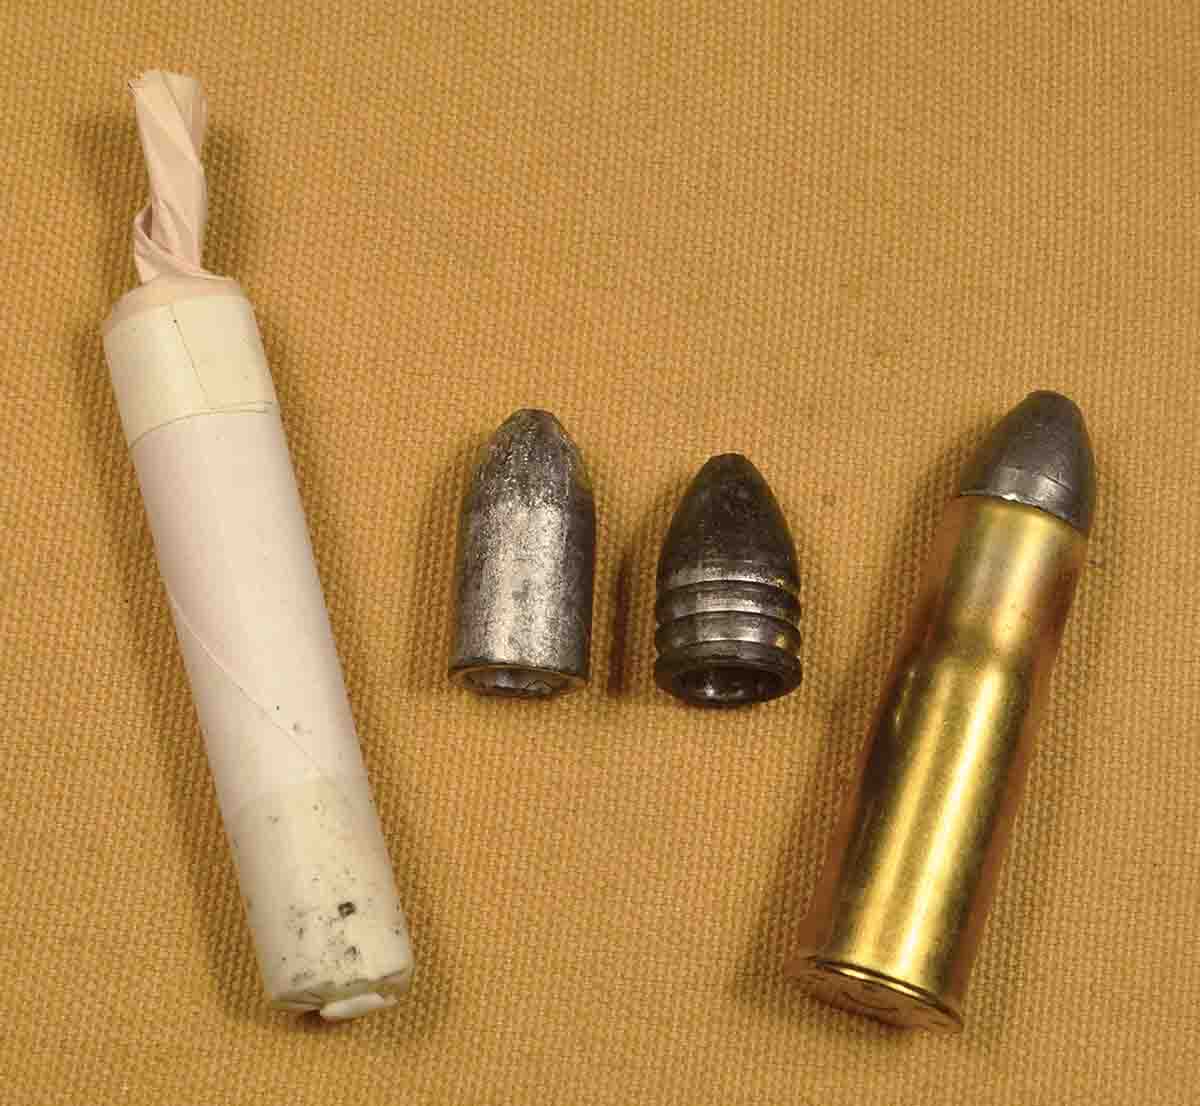 The assembled paper cartridge of the P-1853 (left) with its Pritchard bullet, compared with the later .577 Snider (right) and its cannelured Minié-type bullet. In the Snider, lubrication is held in the cannelures, where the greased paper provides lubrication in the P-1853. The paper cartridge was made by Author Brett Gibbons.